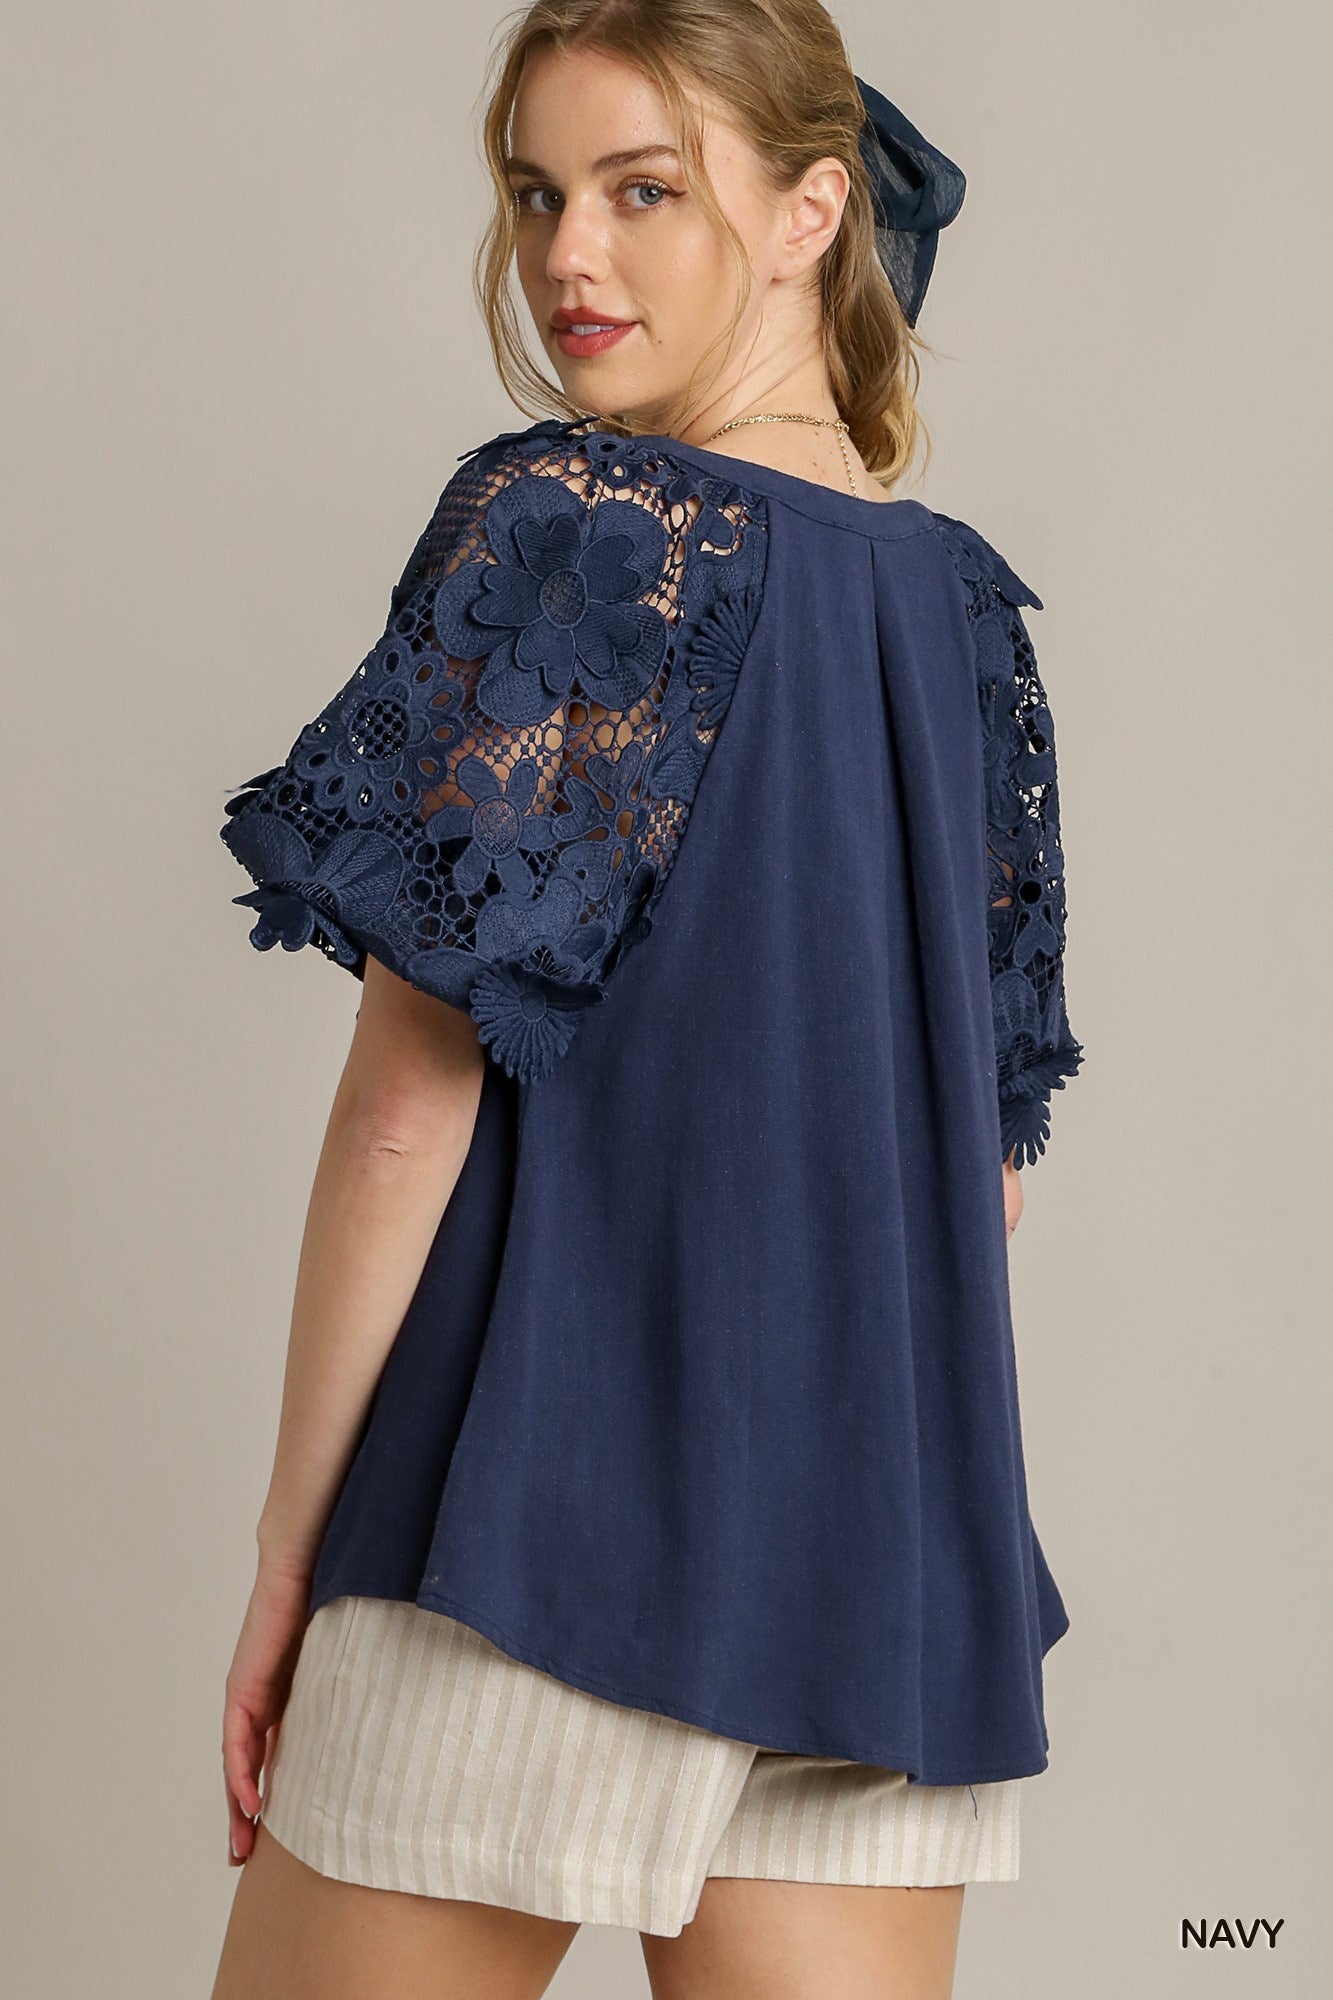 Navy Blue Linen Blend Top w/ Floral Lace Puff Sleeves